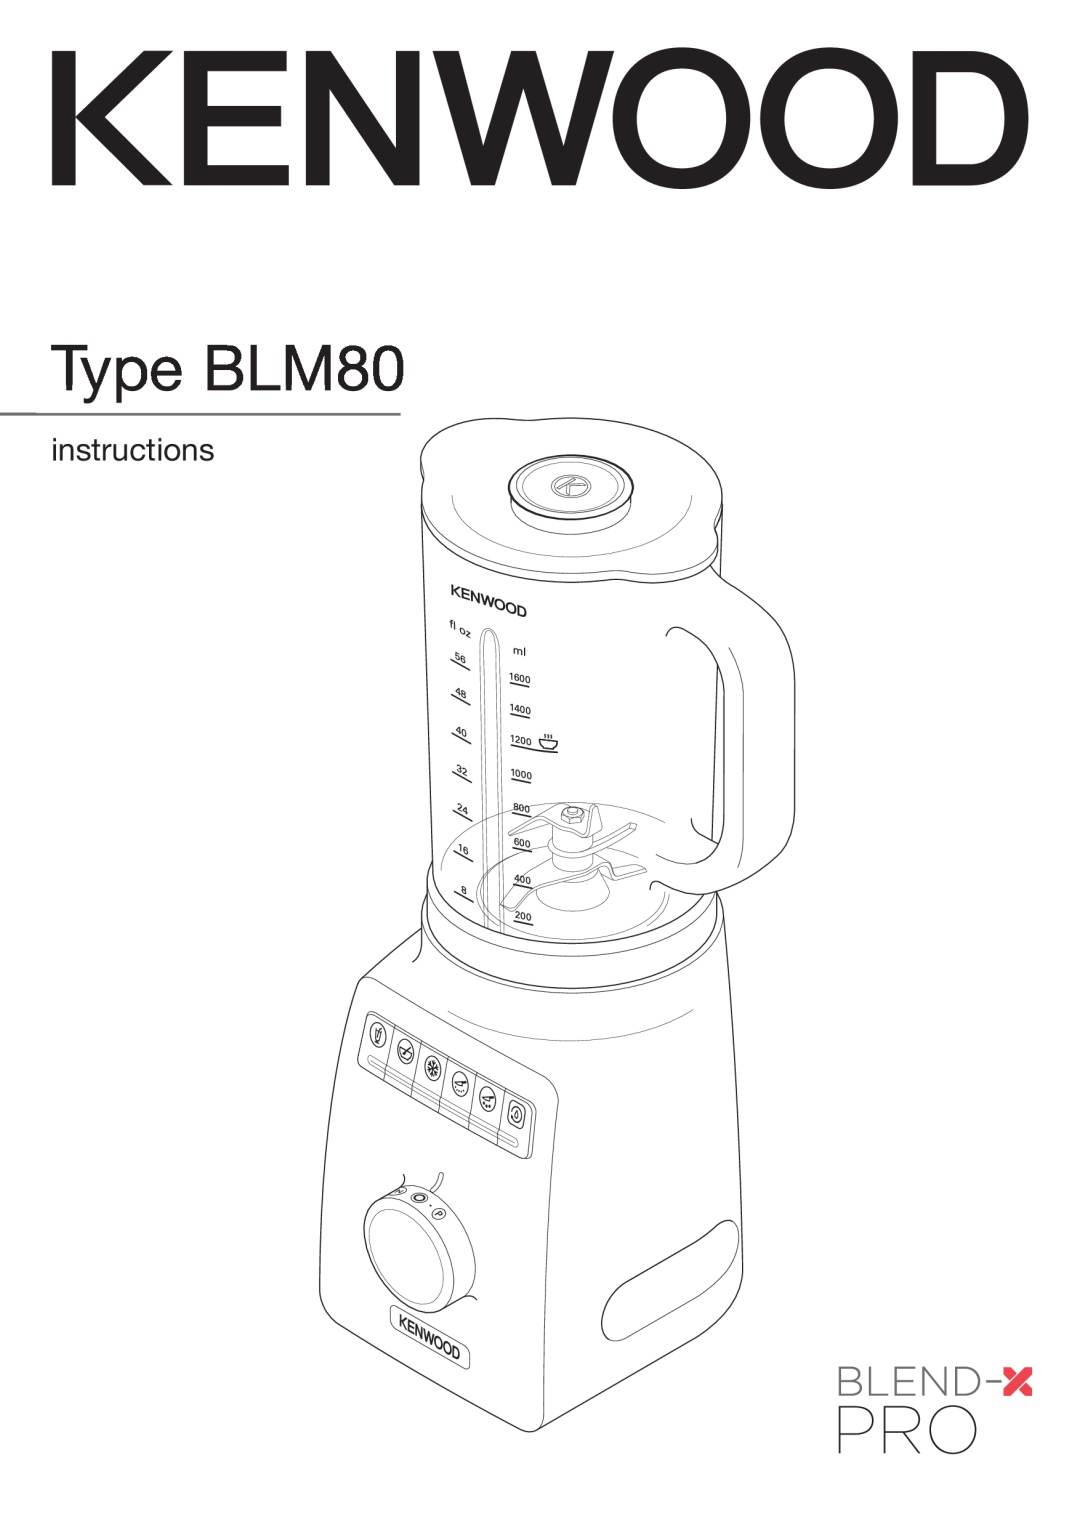 Kenwood manual Type BLM80, instructions 